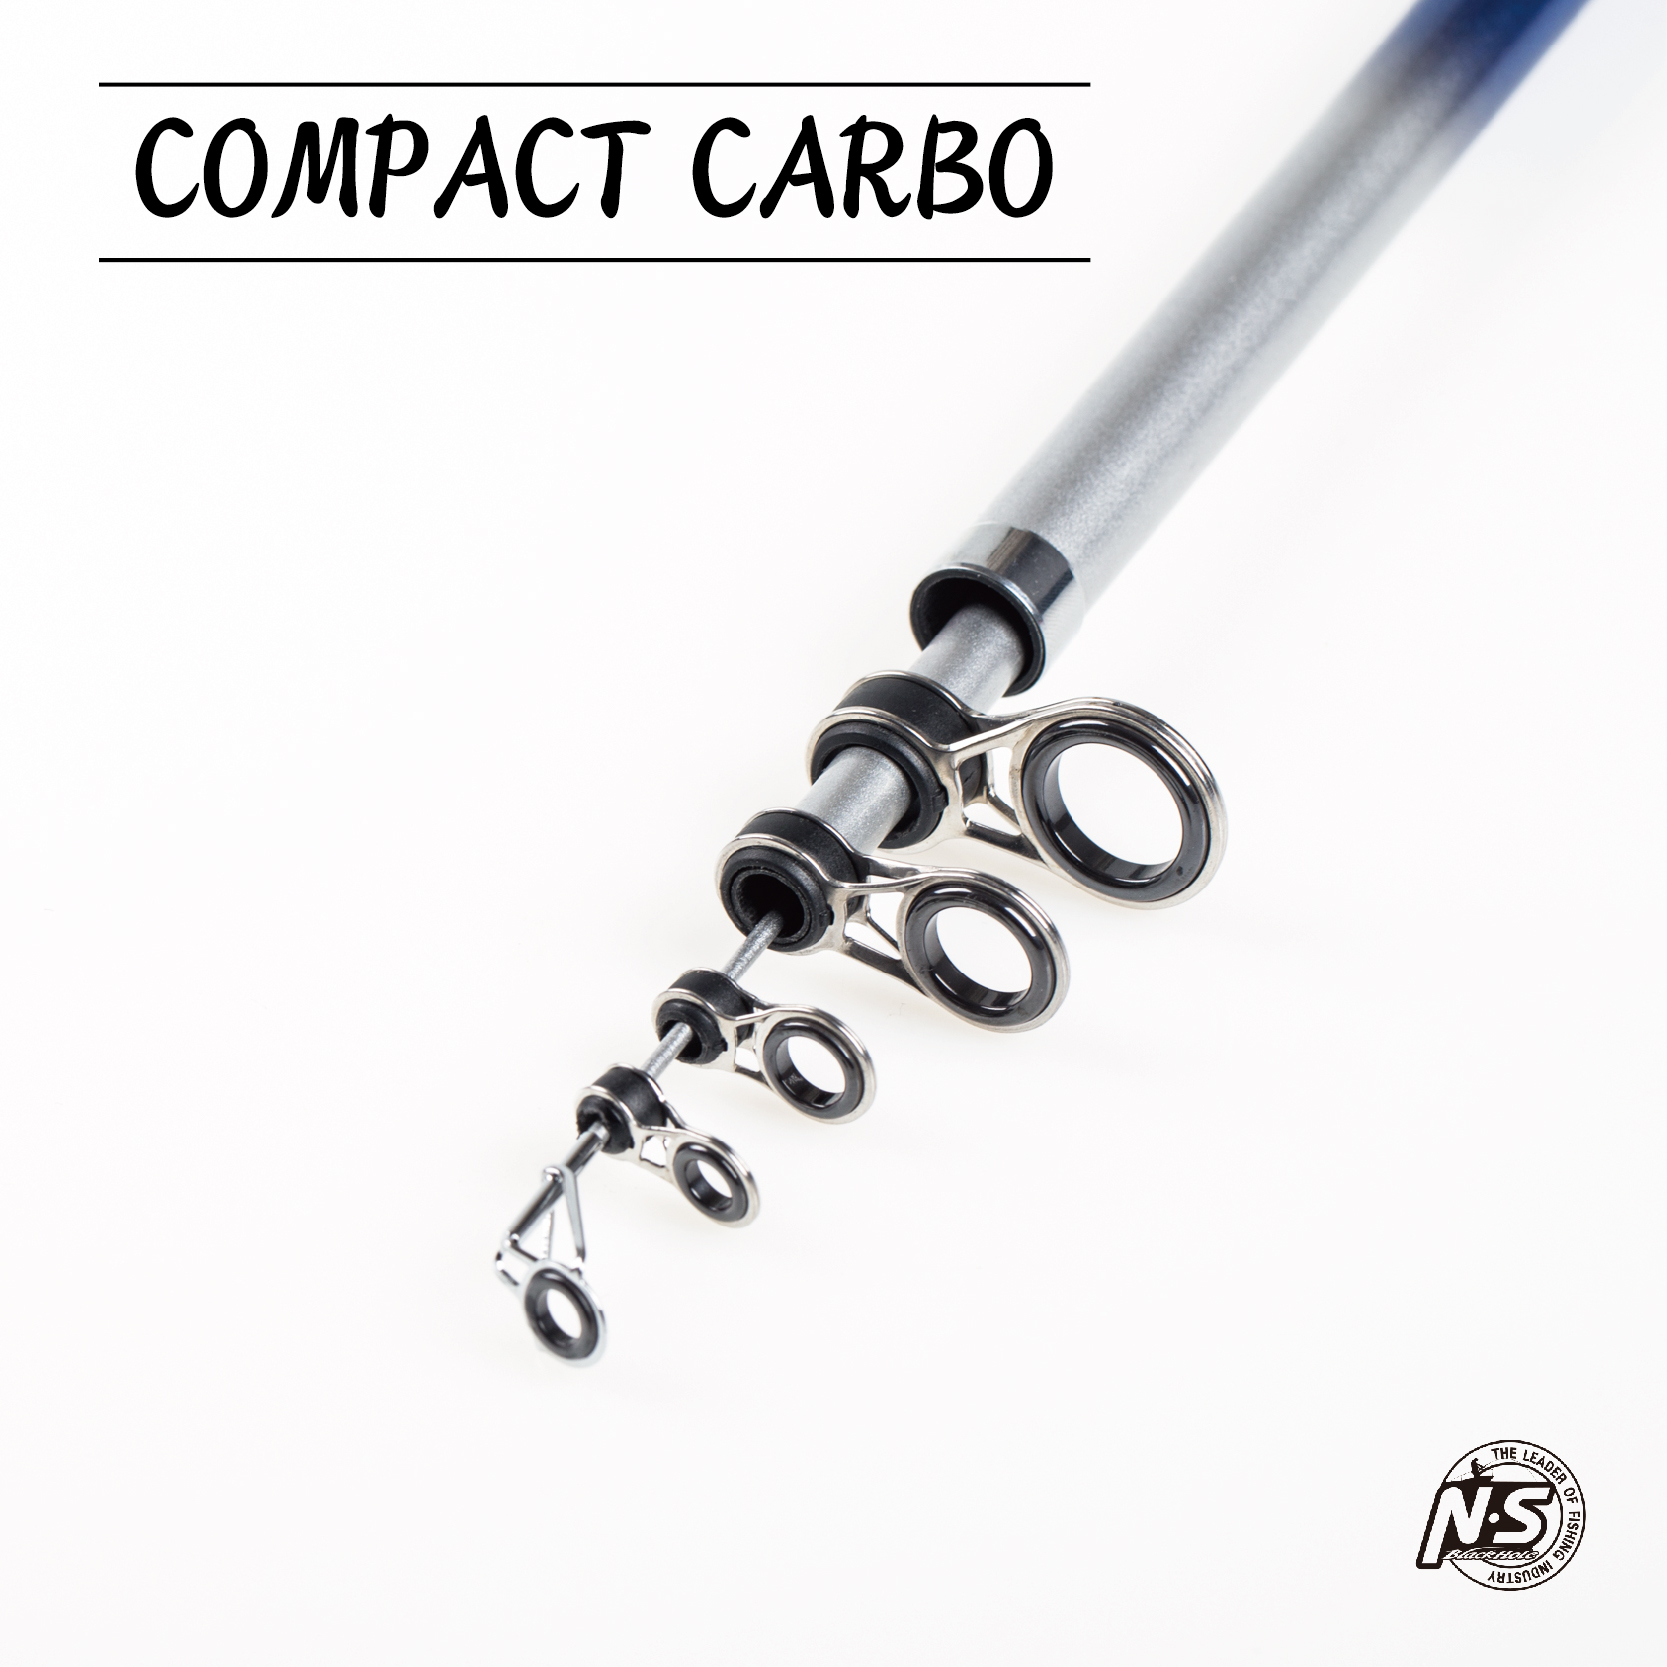 COMPACT CARBO